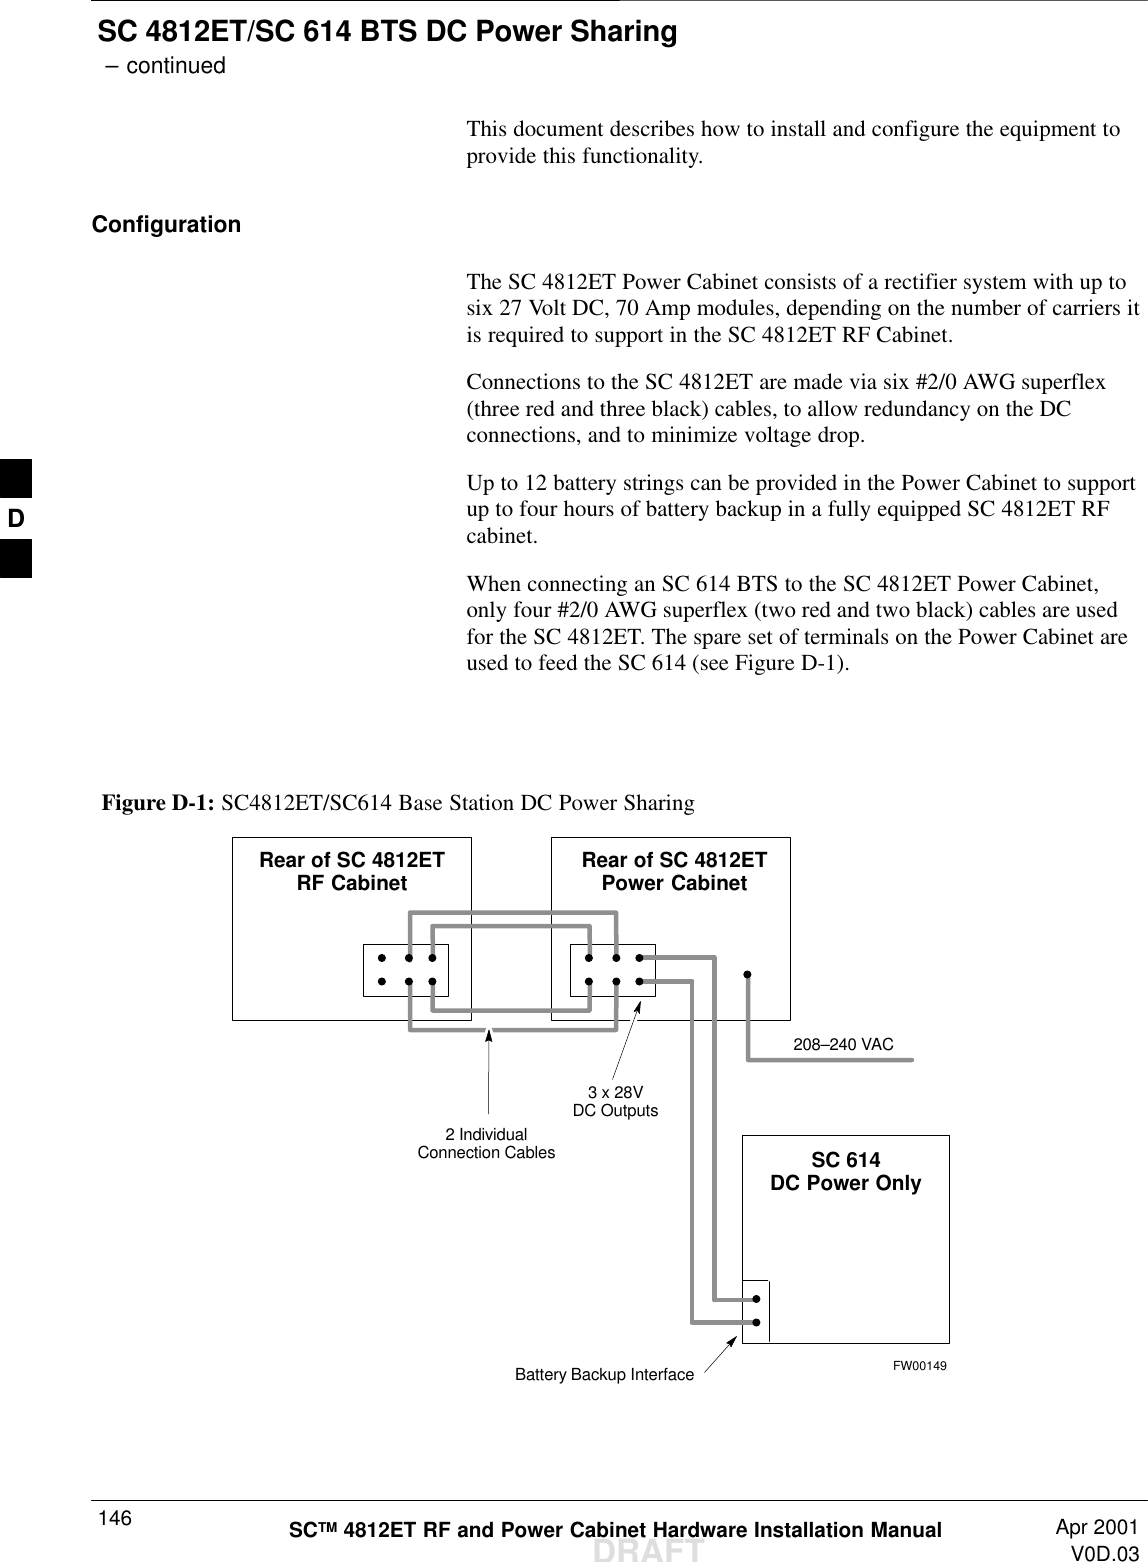 SC 4812ET/SC 614 BTS DC Power Sharing – continuedDRAFTSCTM 4812ET RF and Power Cabinet Hardware Installation Manual Apr 2001V0D.03146This document describes how to install and configure the equipment toprovide this functionality.ConfigurationThe SC 4812ET Power Cabinet consists of a rectifier system with up tosix 27 Volt DC, 70 Amp modules, depending on the number of carriers itis required to support in the SC 4812ET RF Cabinet.Connections to the SC 4812ET are made via six #2/0 AWG superflex(three red and three black) cables, to allow redundancy on the DCconnections, and to minimize voltage drop.Up to 12 battery strings can be provided in the Power Cabinet to supportup to four hours of battery backup in a fully equipped SC 4812ET RFcabinet.When connecting an SC 614 BTS to the SC 4812ET Power Cabinet,only four #2/0 AWG superflex (two red and two black) cables are usedfor the SC 4812ET. The spare set of terminals on the Power Cabinet areused to feed the SC 614 (see Figure D-1).FW00149Figure D-1: SC4812ET/SC614 Base Station DC Power Sharing2 IndividualConnection Cables3 x 28VDC OutputsRear of SC 4812ETRF Cabinet Rear of SC 4812ETPower CabinetSC 614DC Power OnlyBattery Backup Interface208–240 VACD